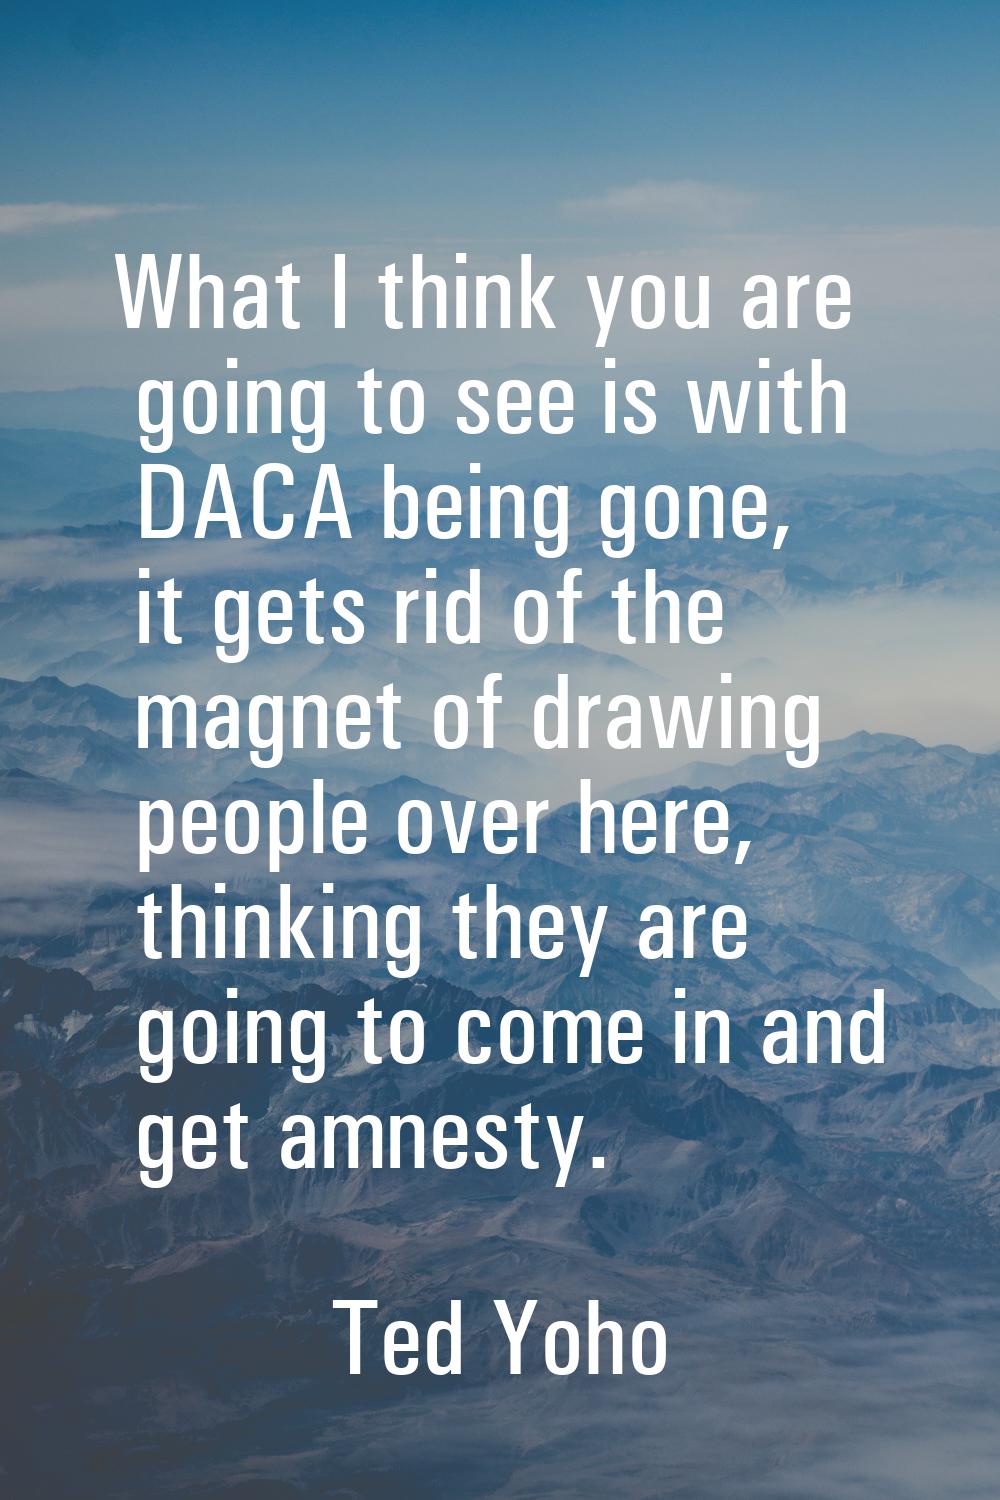 What I think you are going to see is with DACA being gone, it gets rid of the magnet of drawing peo